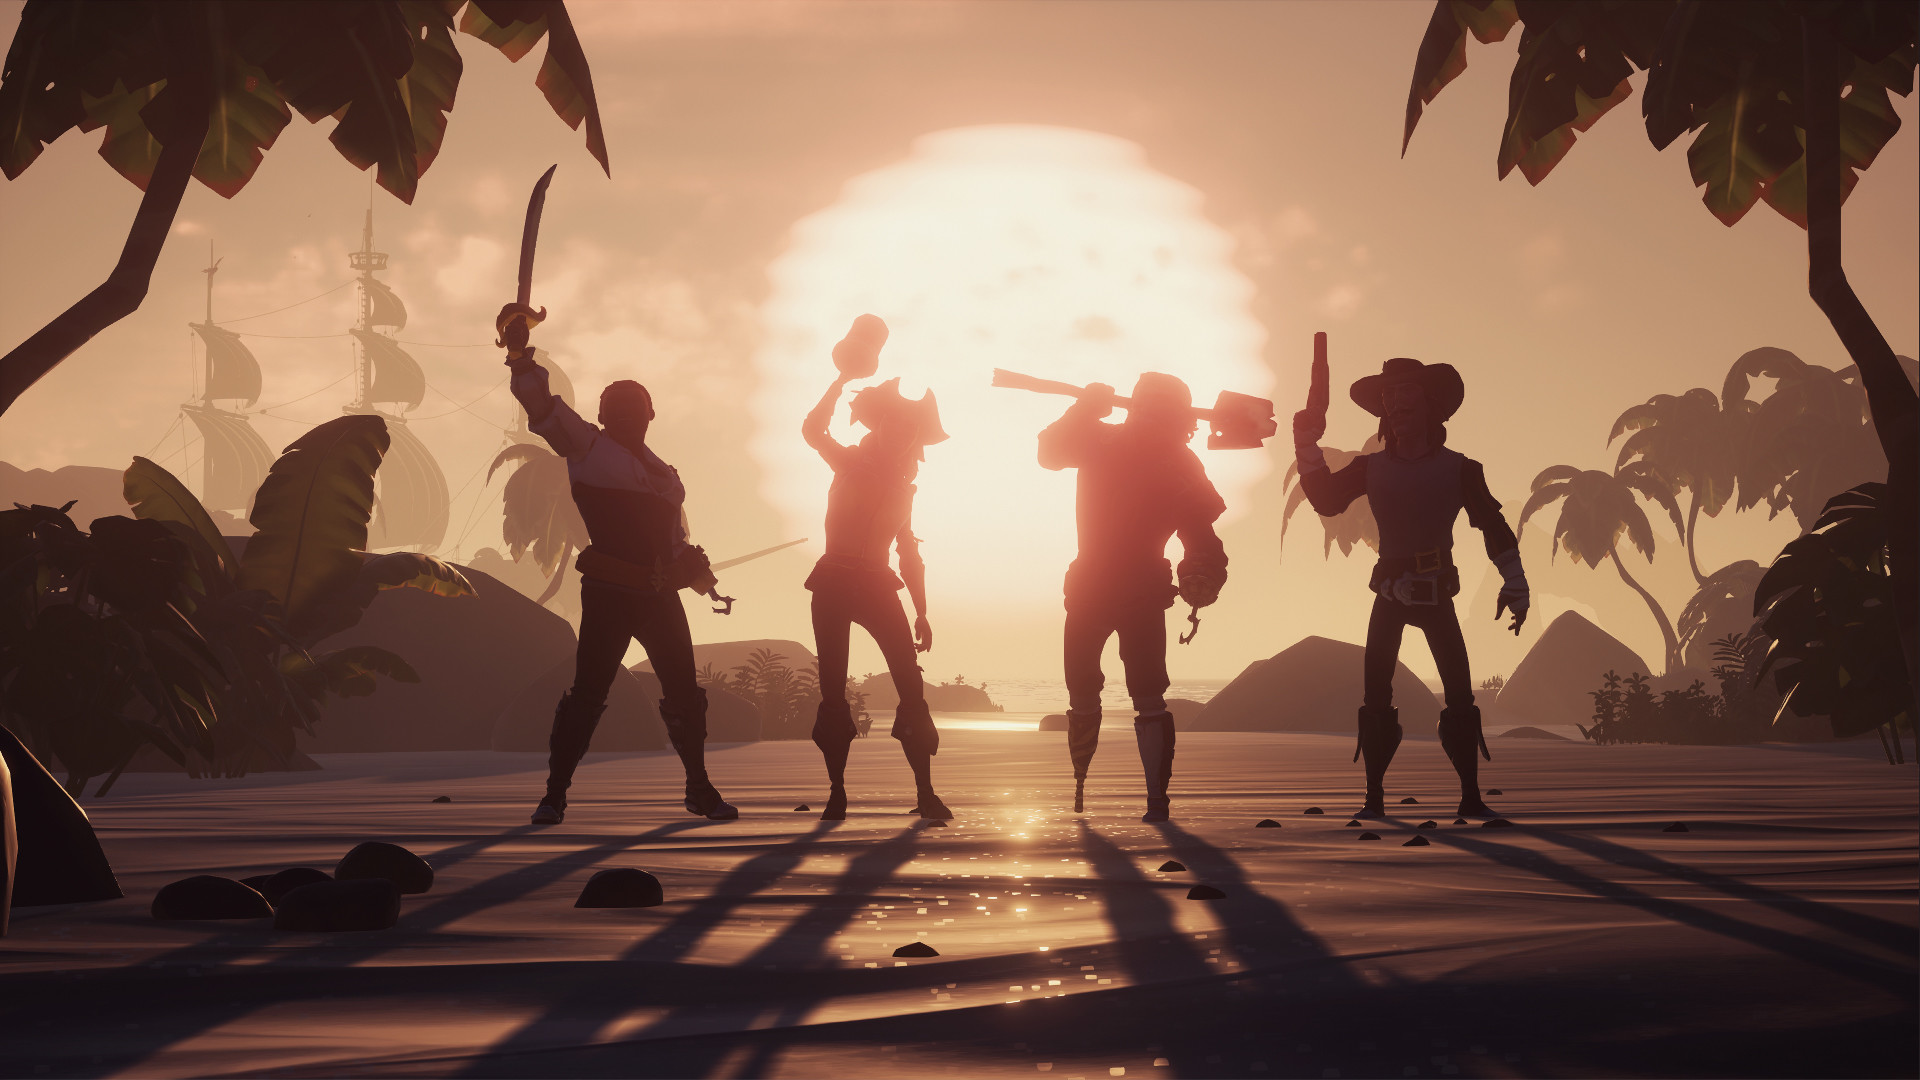  Sea of Thieves’ Festival of Giving and Gilded Voyages return on December 9 